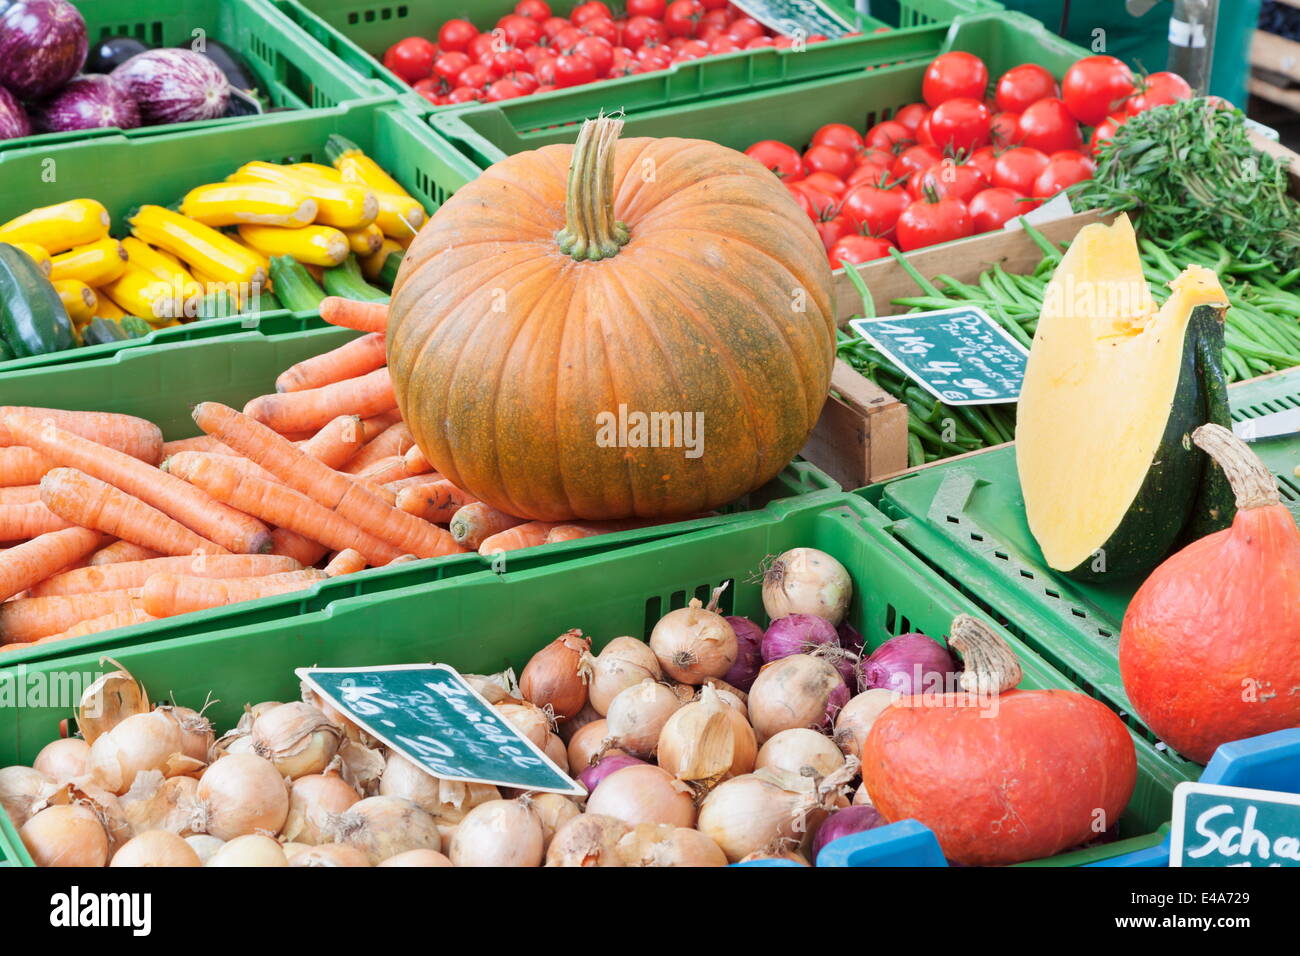 Pumpkin, onions, zucchini (courgettes), carrots, tomatoes and beans at a market stall, Esslingen, Baden Wurttemberg, Germany Stock Photo